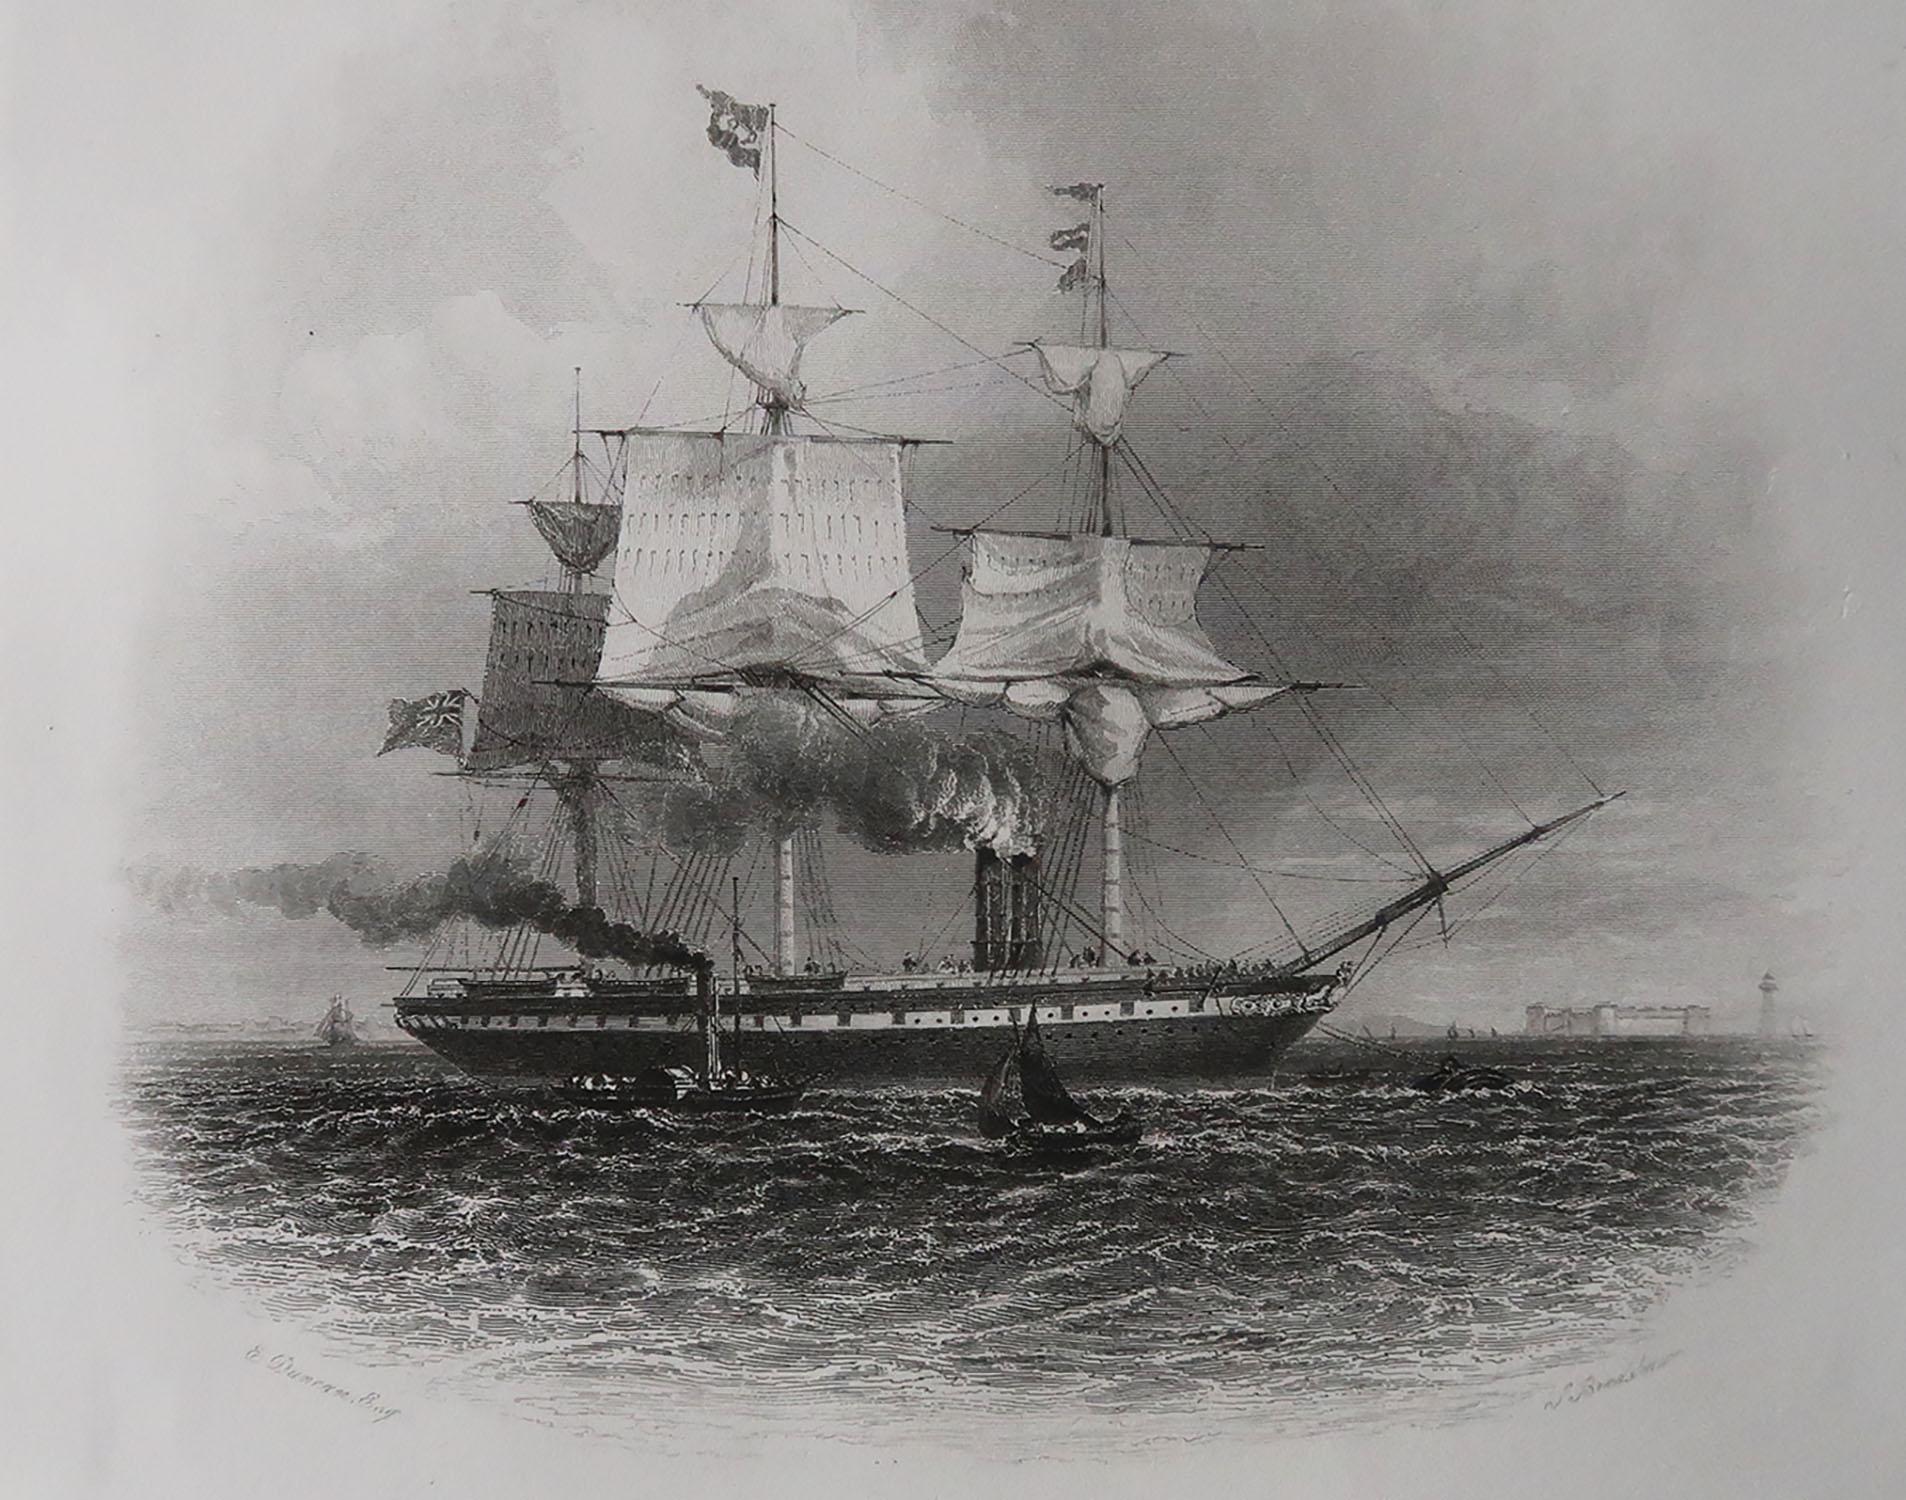 Great image of The S.S. Great Britain leaving Liverpool, 1853

Steel engraving by Bradshaw after E.Duncan

Published by Blackie. C.1850

Unframed.

Free shipping.